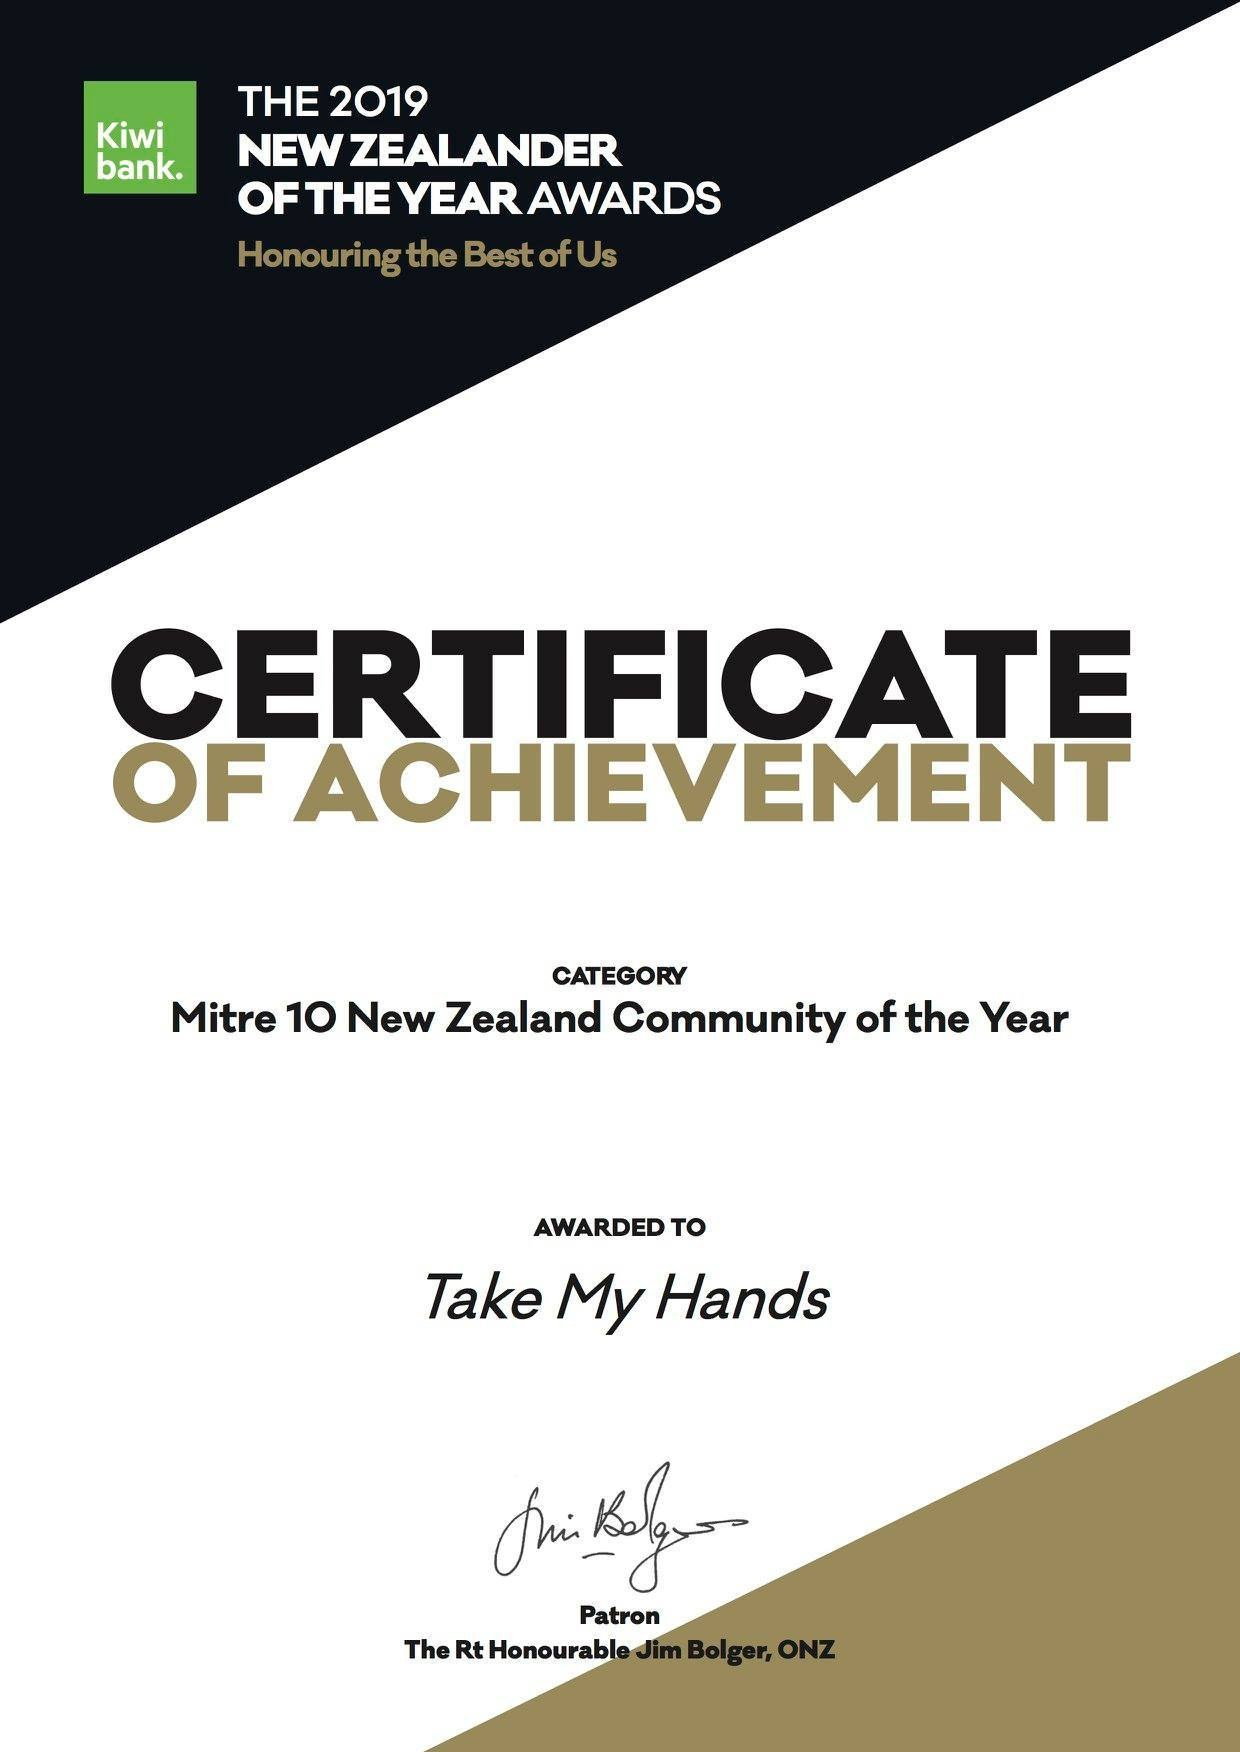 Take My Hands achieves recognition at The New Zealander of the Year Awards